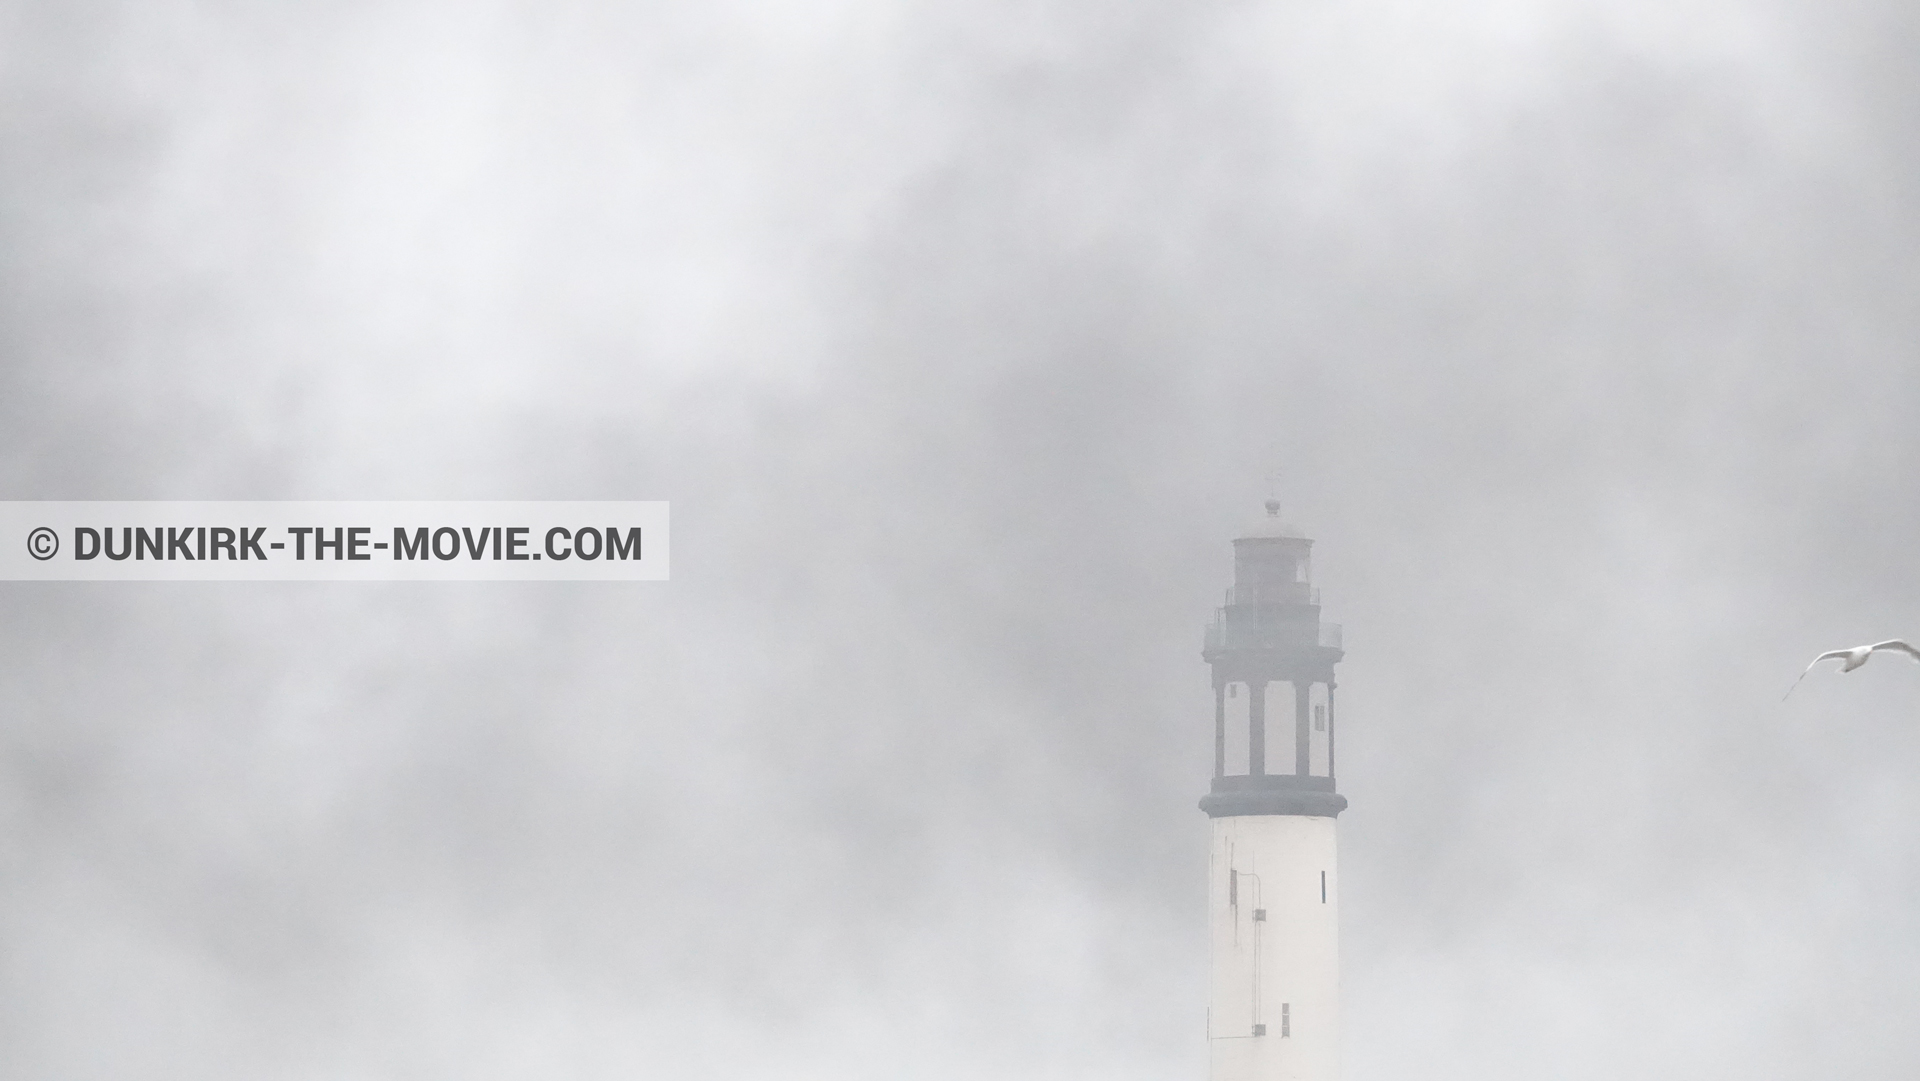 Picture with black smoke, Dunkirk lighthouse,  from behind the scene of the Dunkirk movie by Nolan